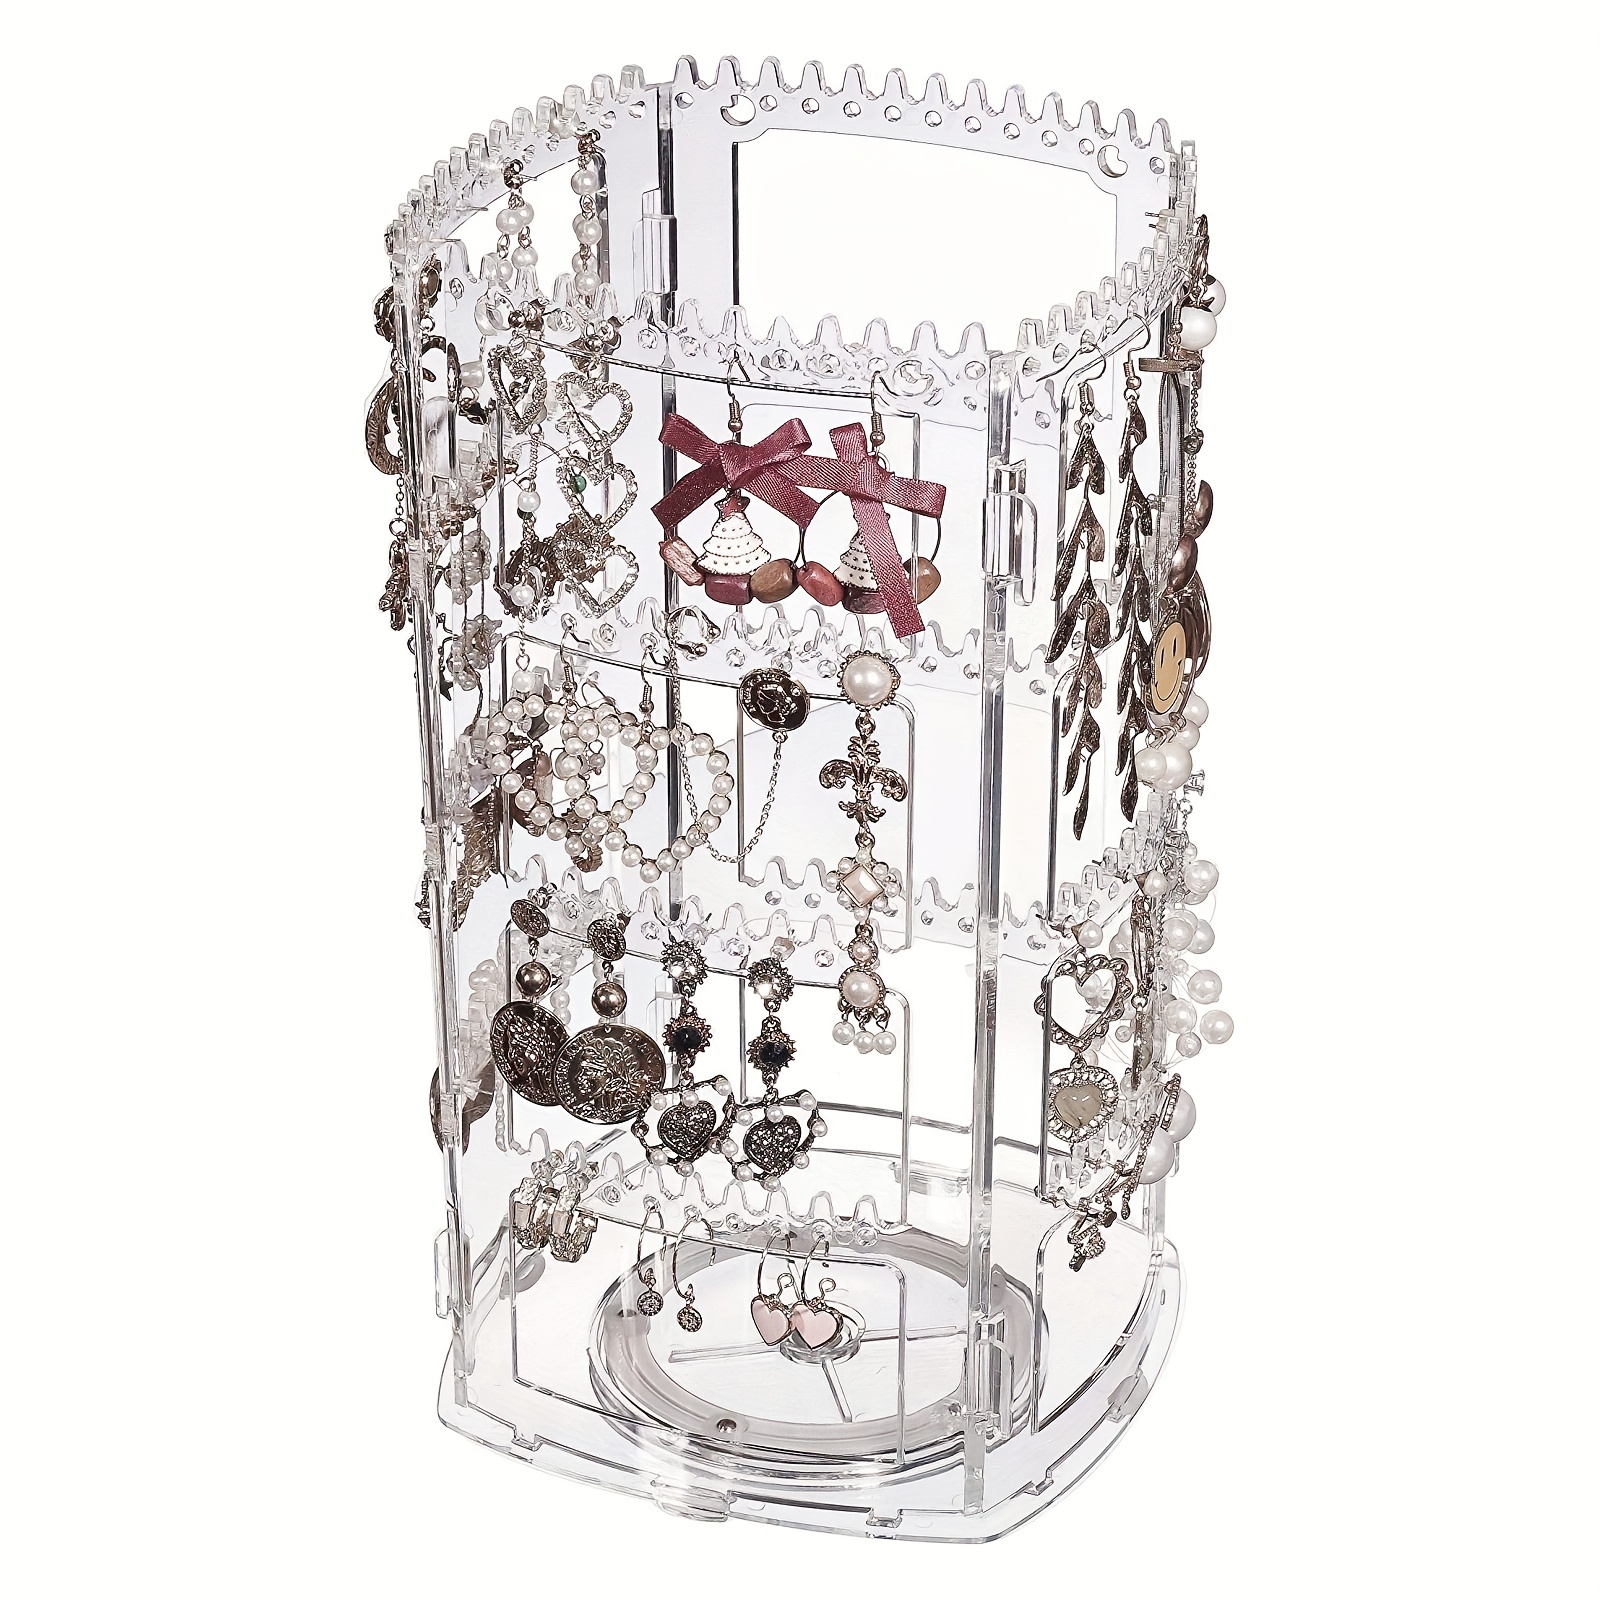 YIUKEA 360 Rotating Earring Holder - Earring Organizer Stand Rack, Jewelry  Storage Tree with Mable Base, Necklace Organizer Display for Women Girl